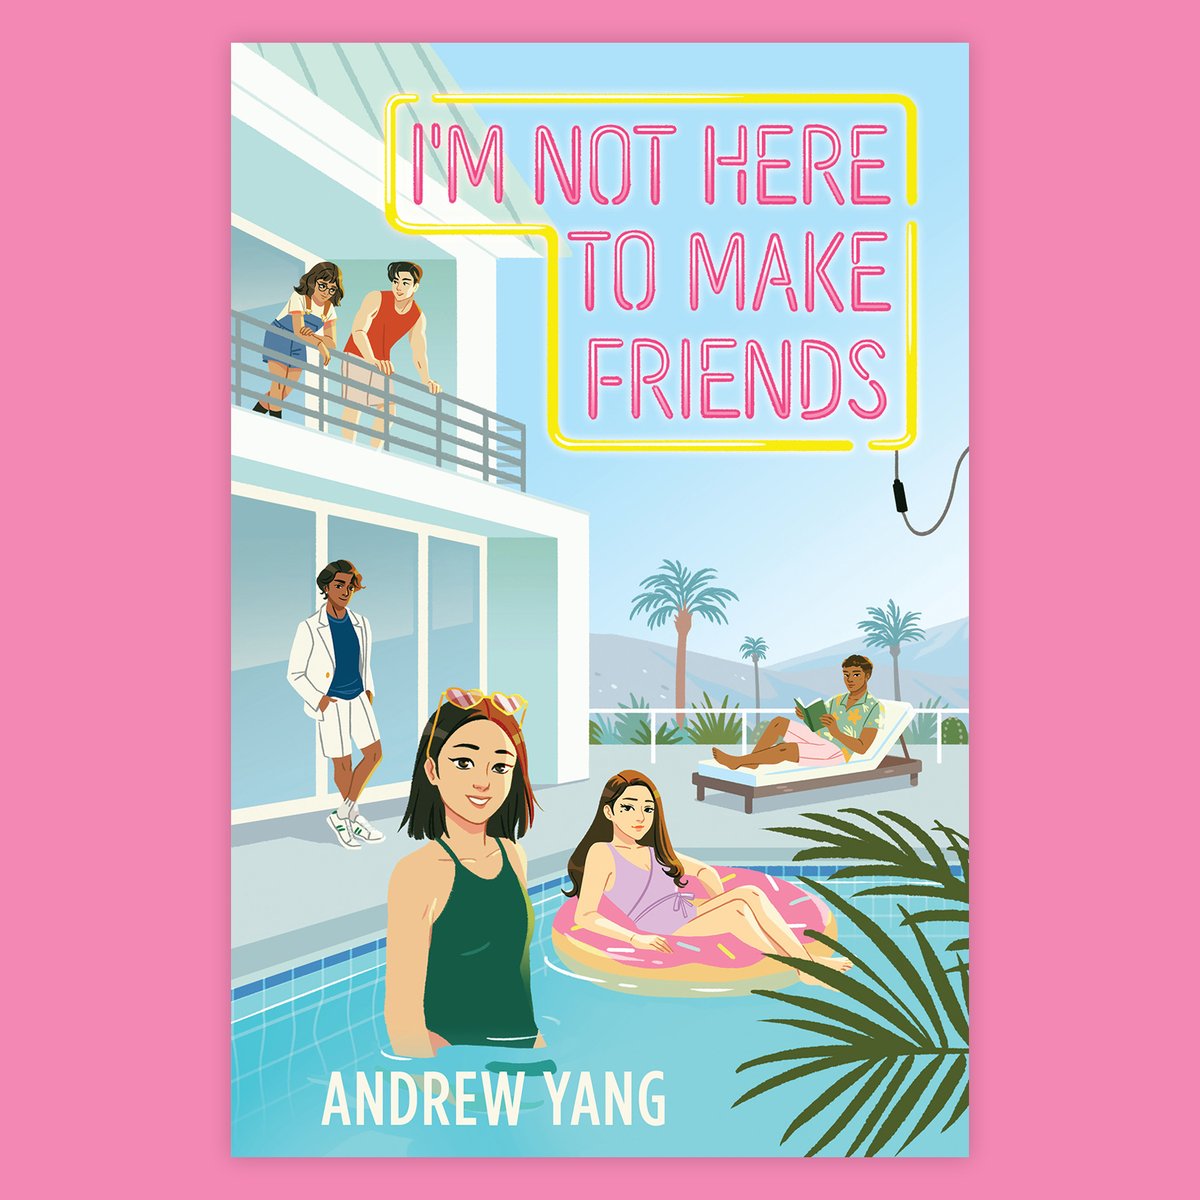 happy book birthday to I'M NOT HERE TO MAKE FRIENDS by @ayang_writes 🌴🍩 in bookstores today!